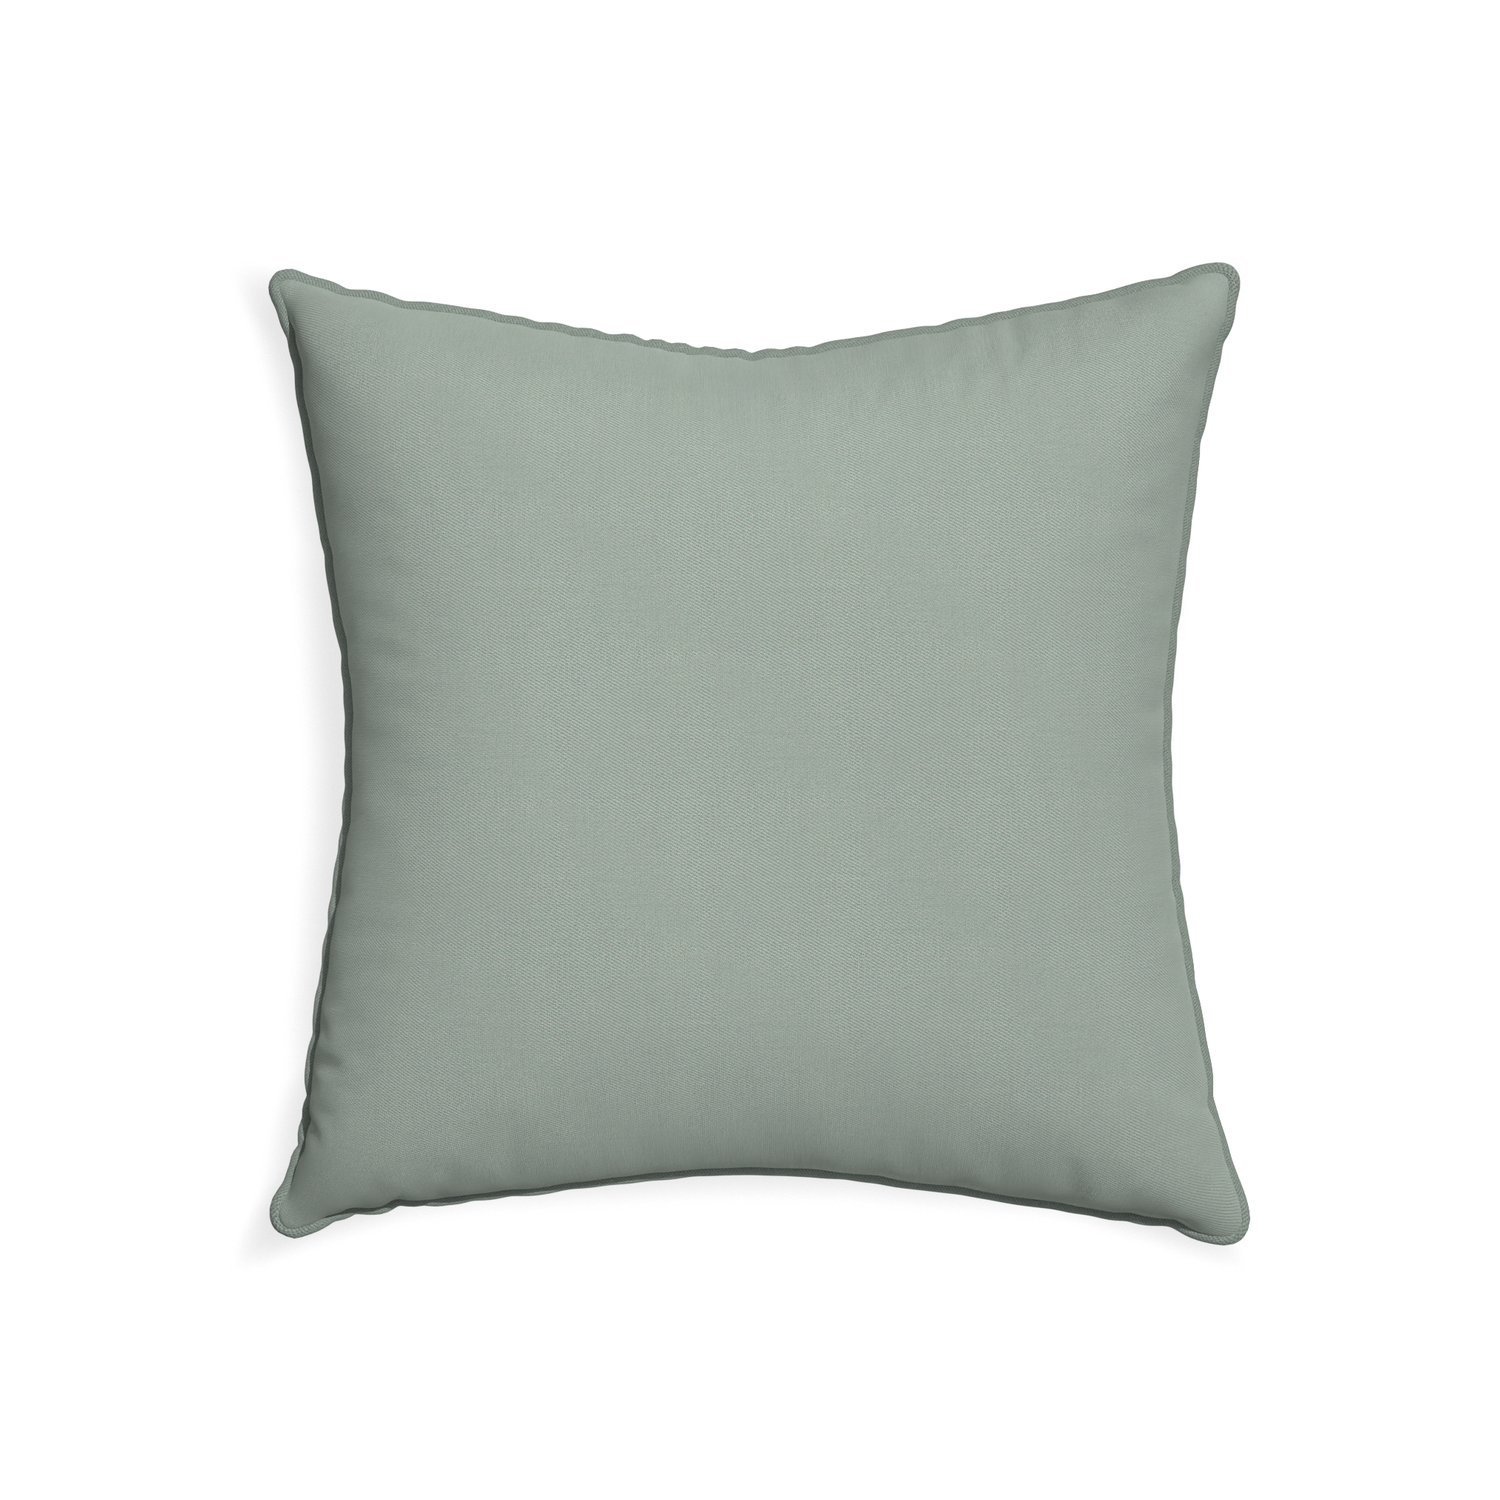 22-square sage custom sage green cottonpillow with sage piping on white background